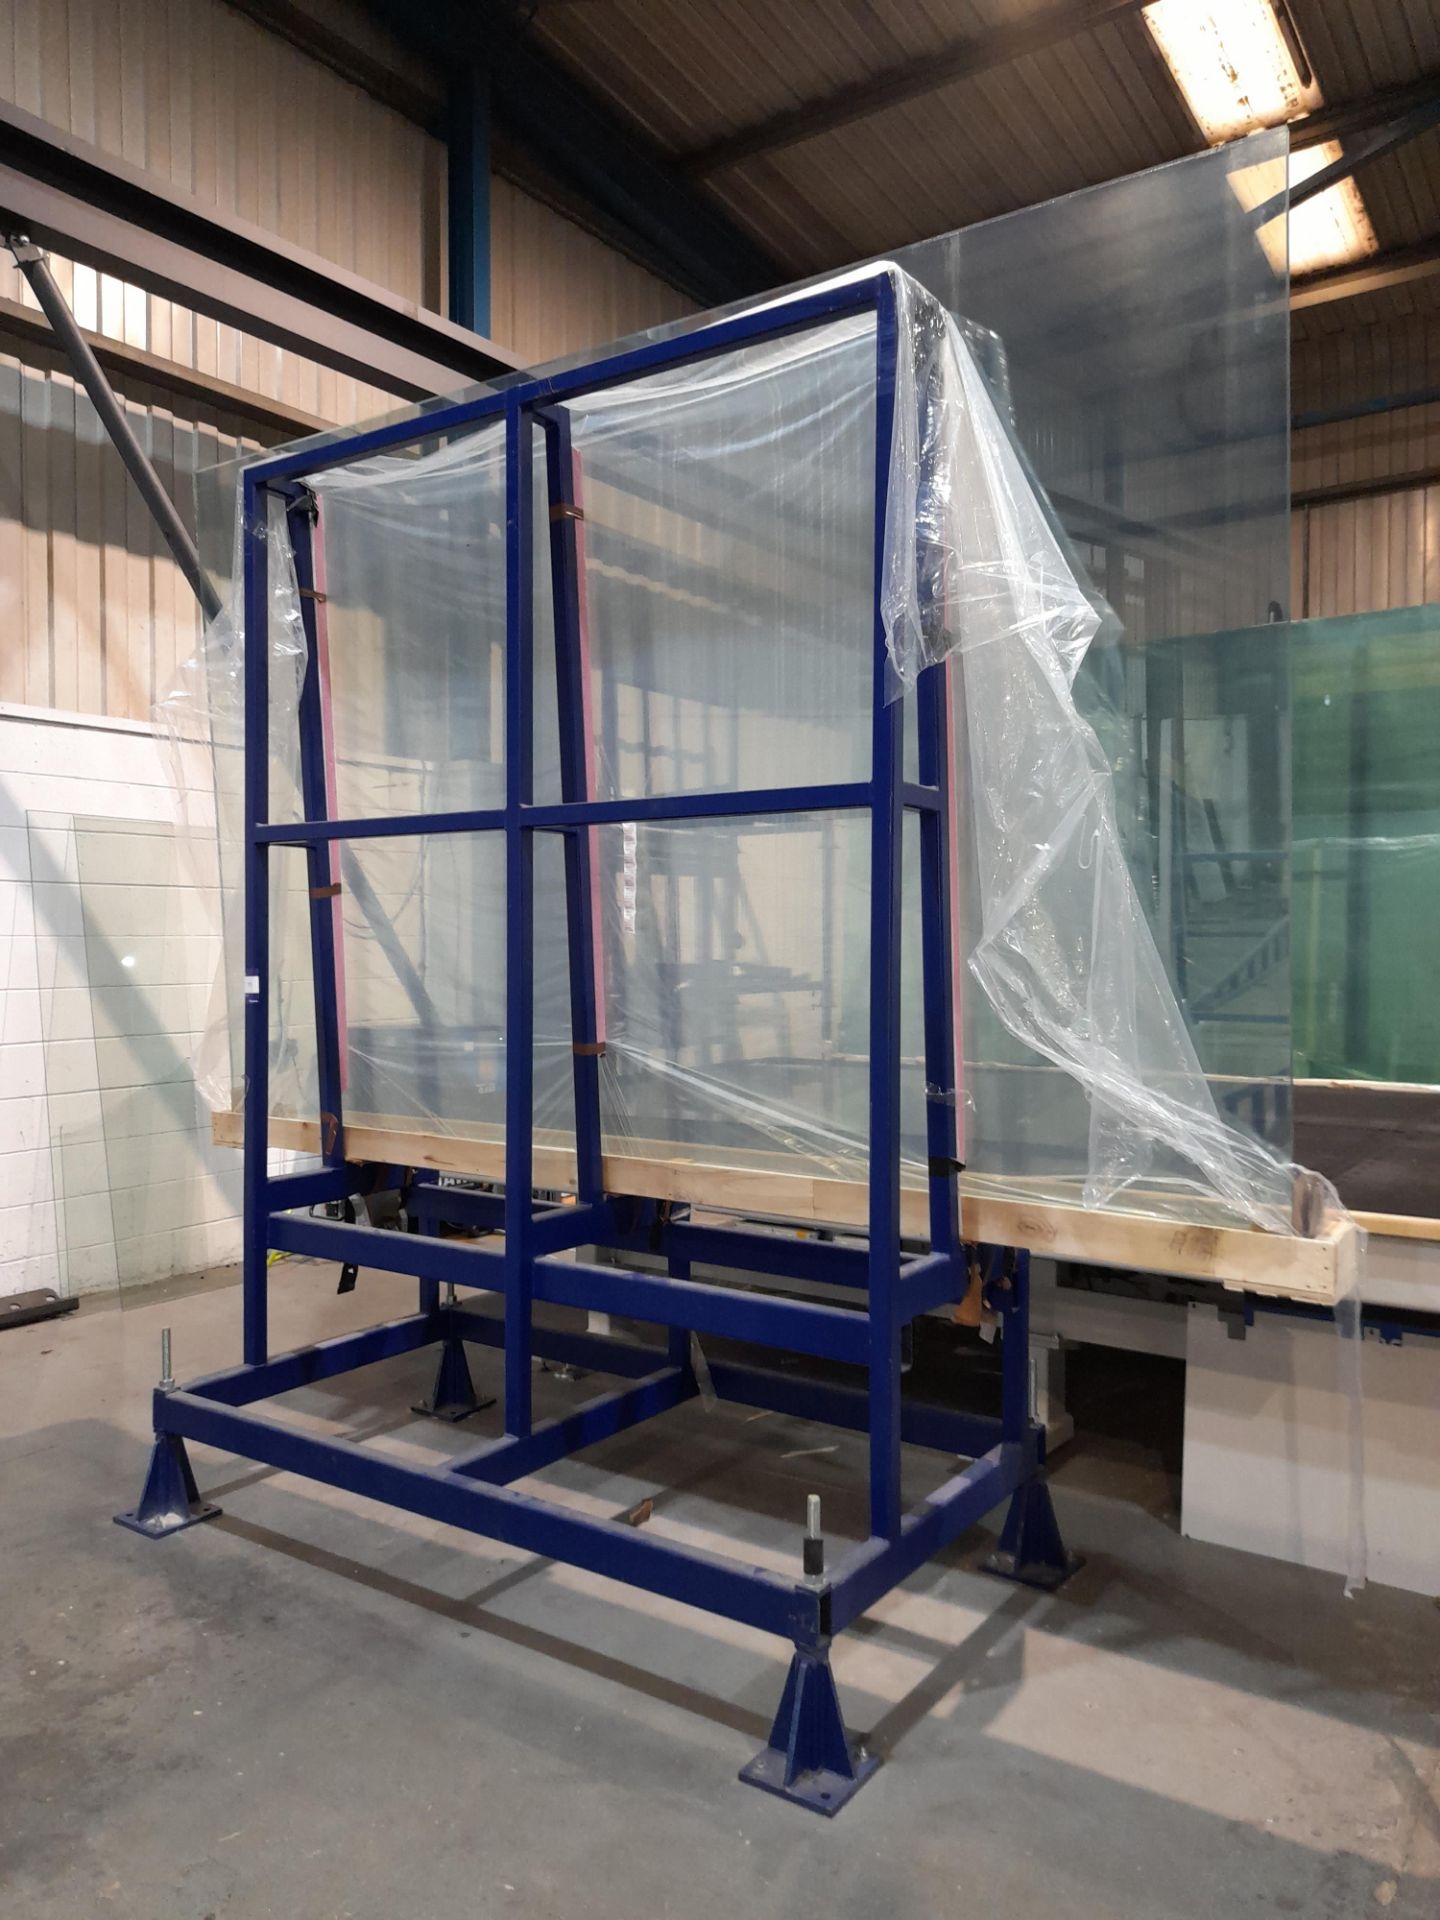 2 x Sheet Glass stock stillage (Contents Included) - Image 2 of 5